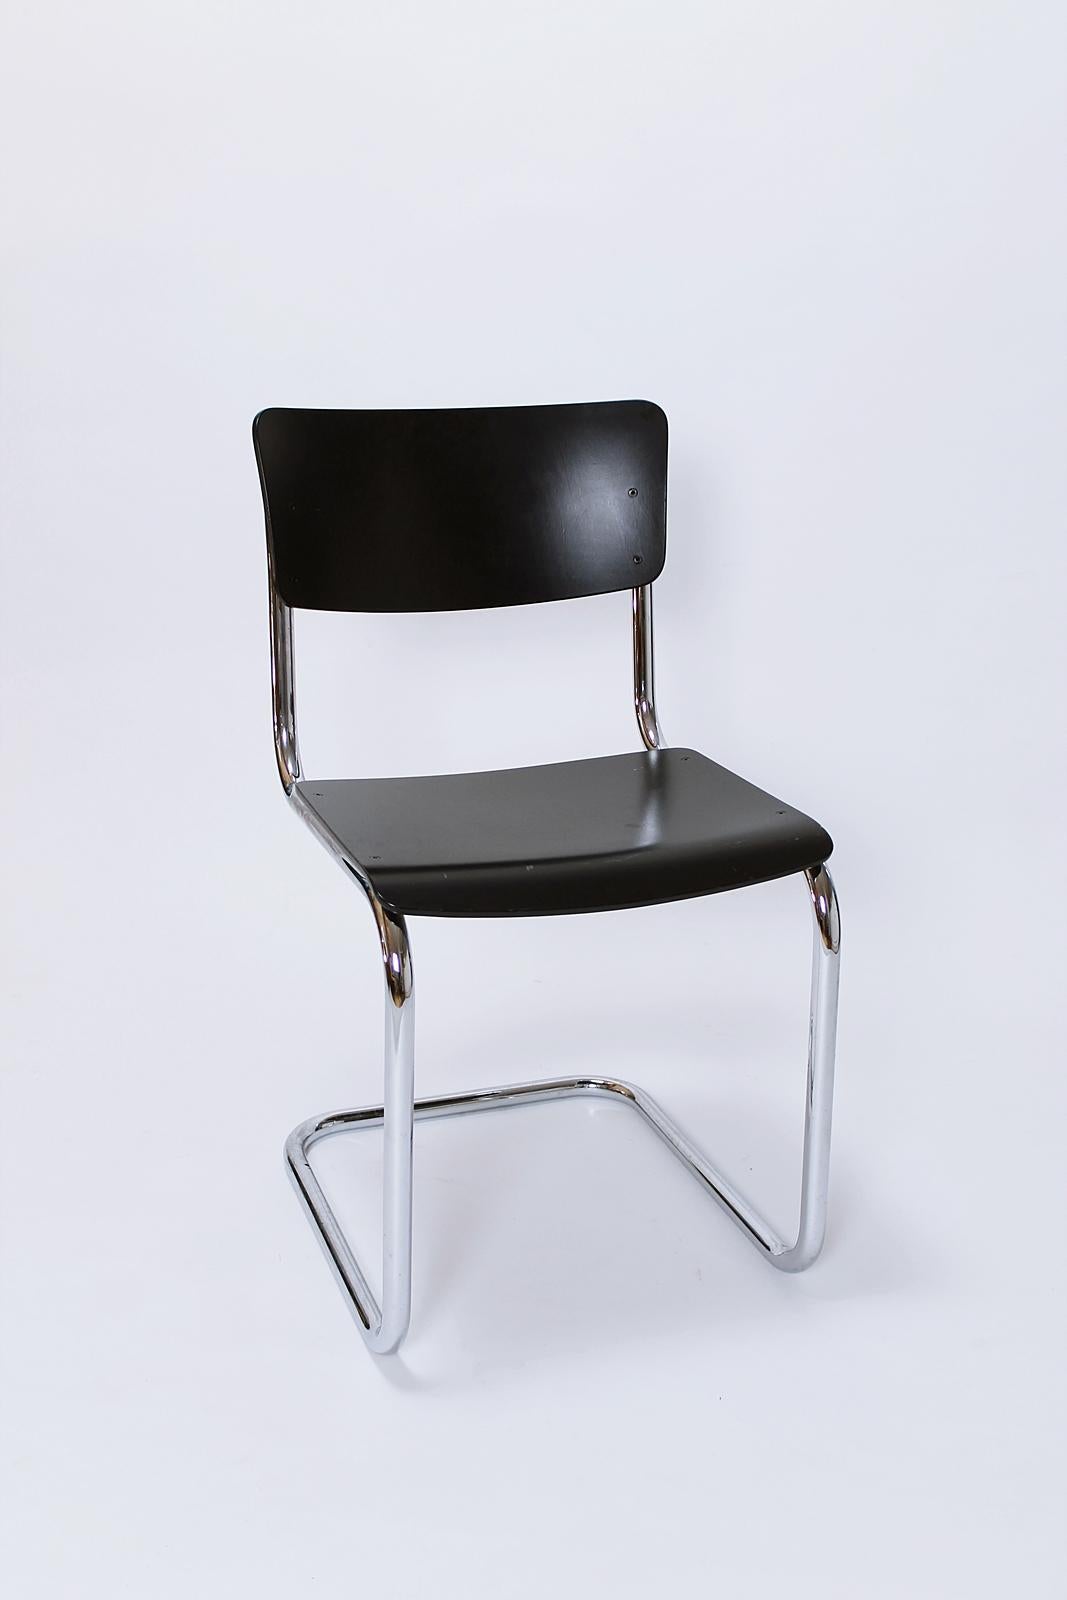 Pressed Bauhaus Classic S43 Cantilevered Chair by Mart Stam for Thonet, Germany For Sale